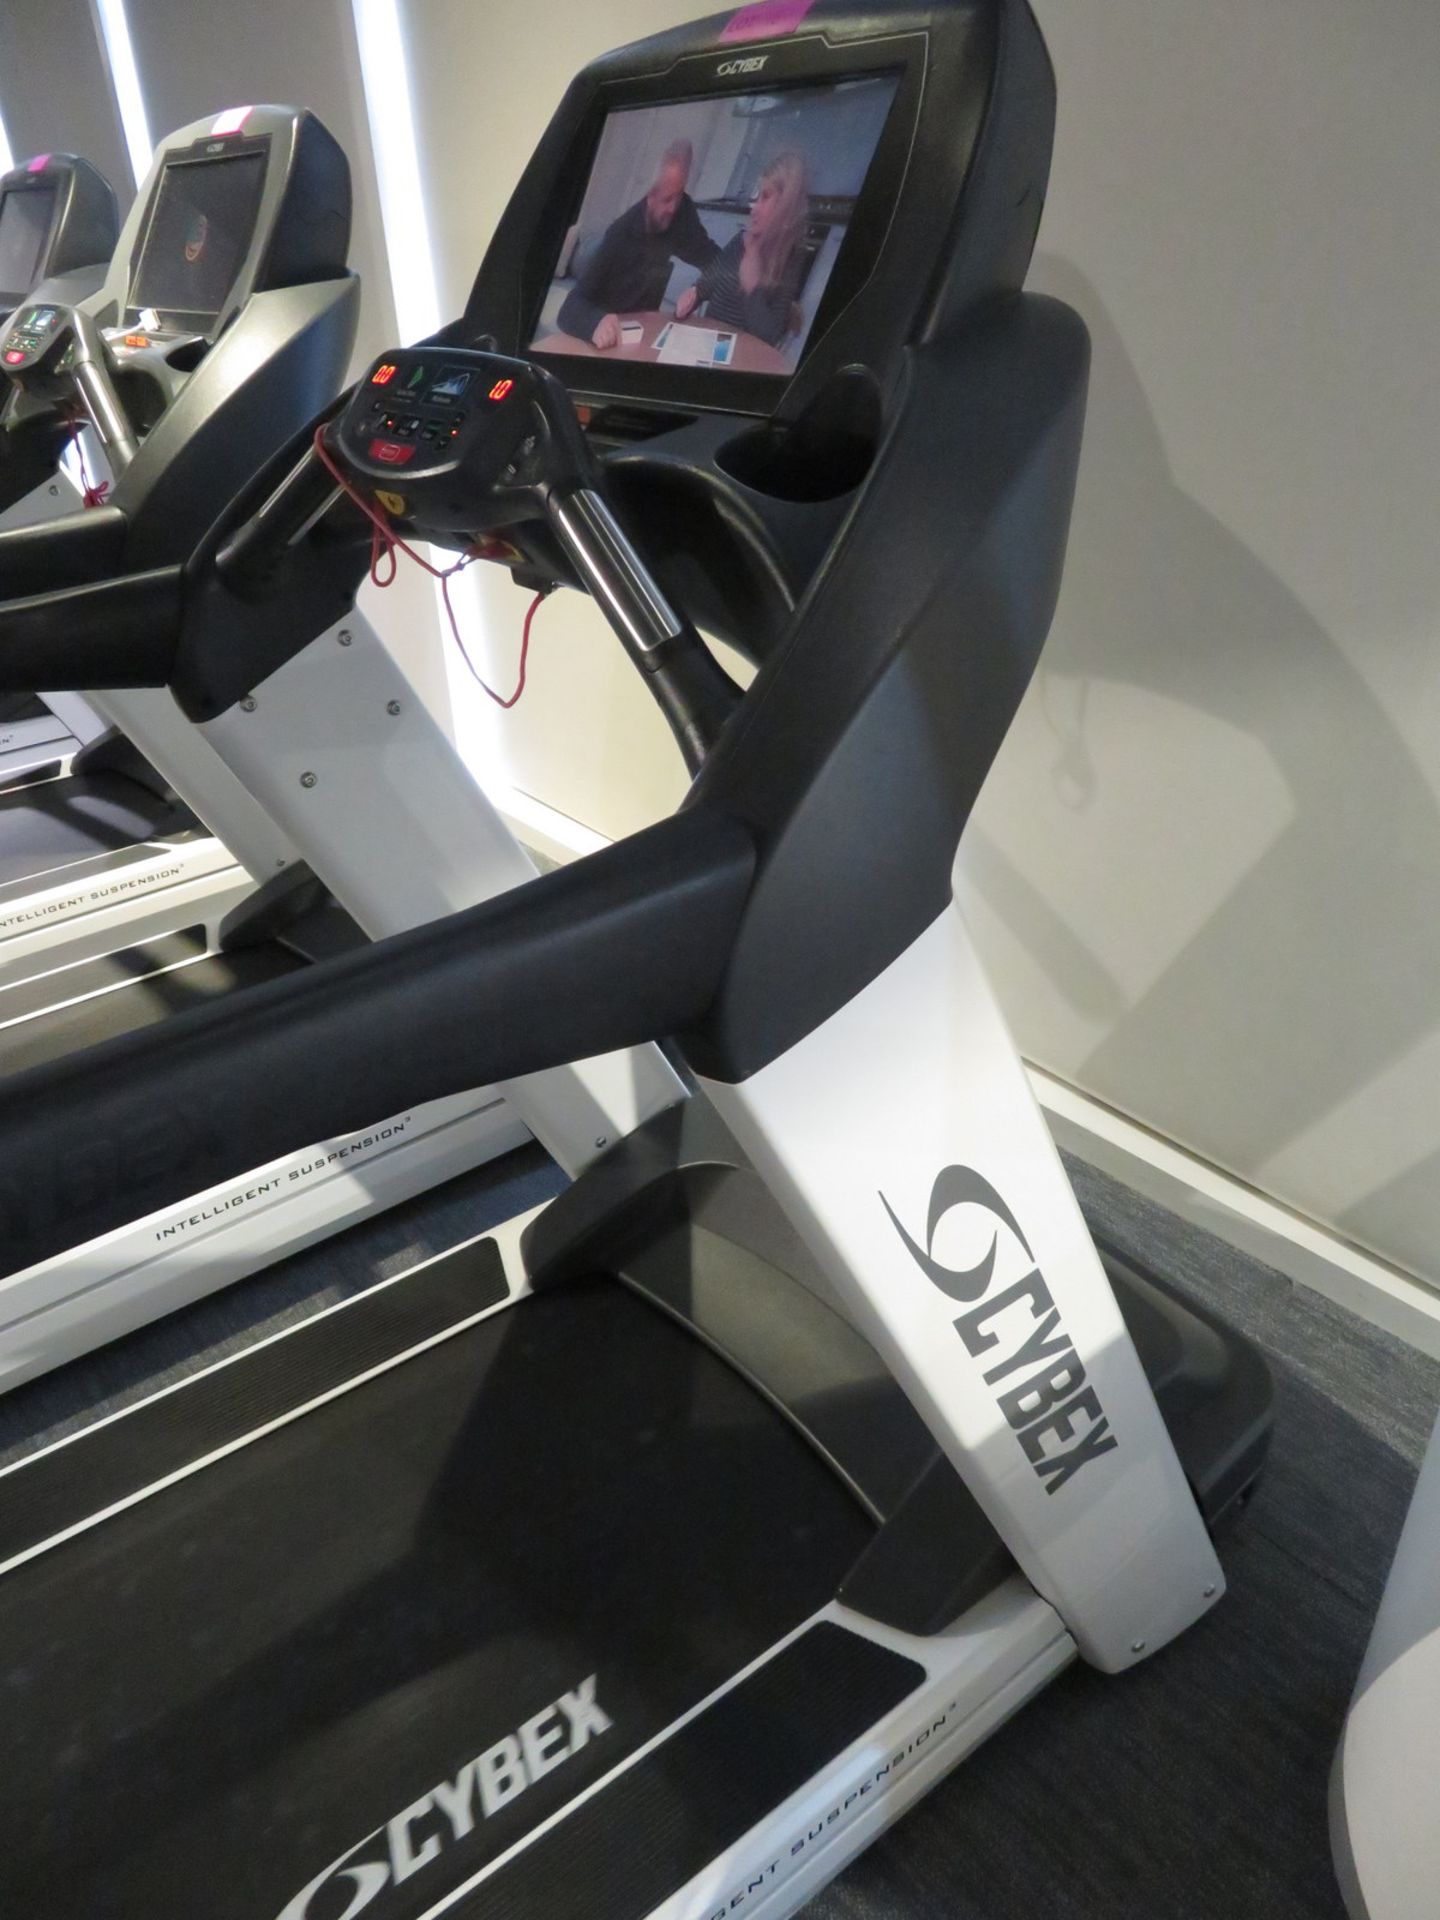 Cybex Treadmill Model: 625T, Working Condition With TV Display Monitor. - Image 8 of 9